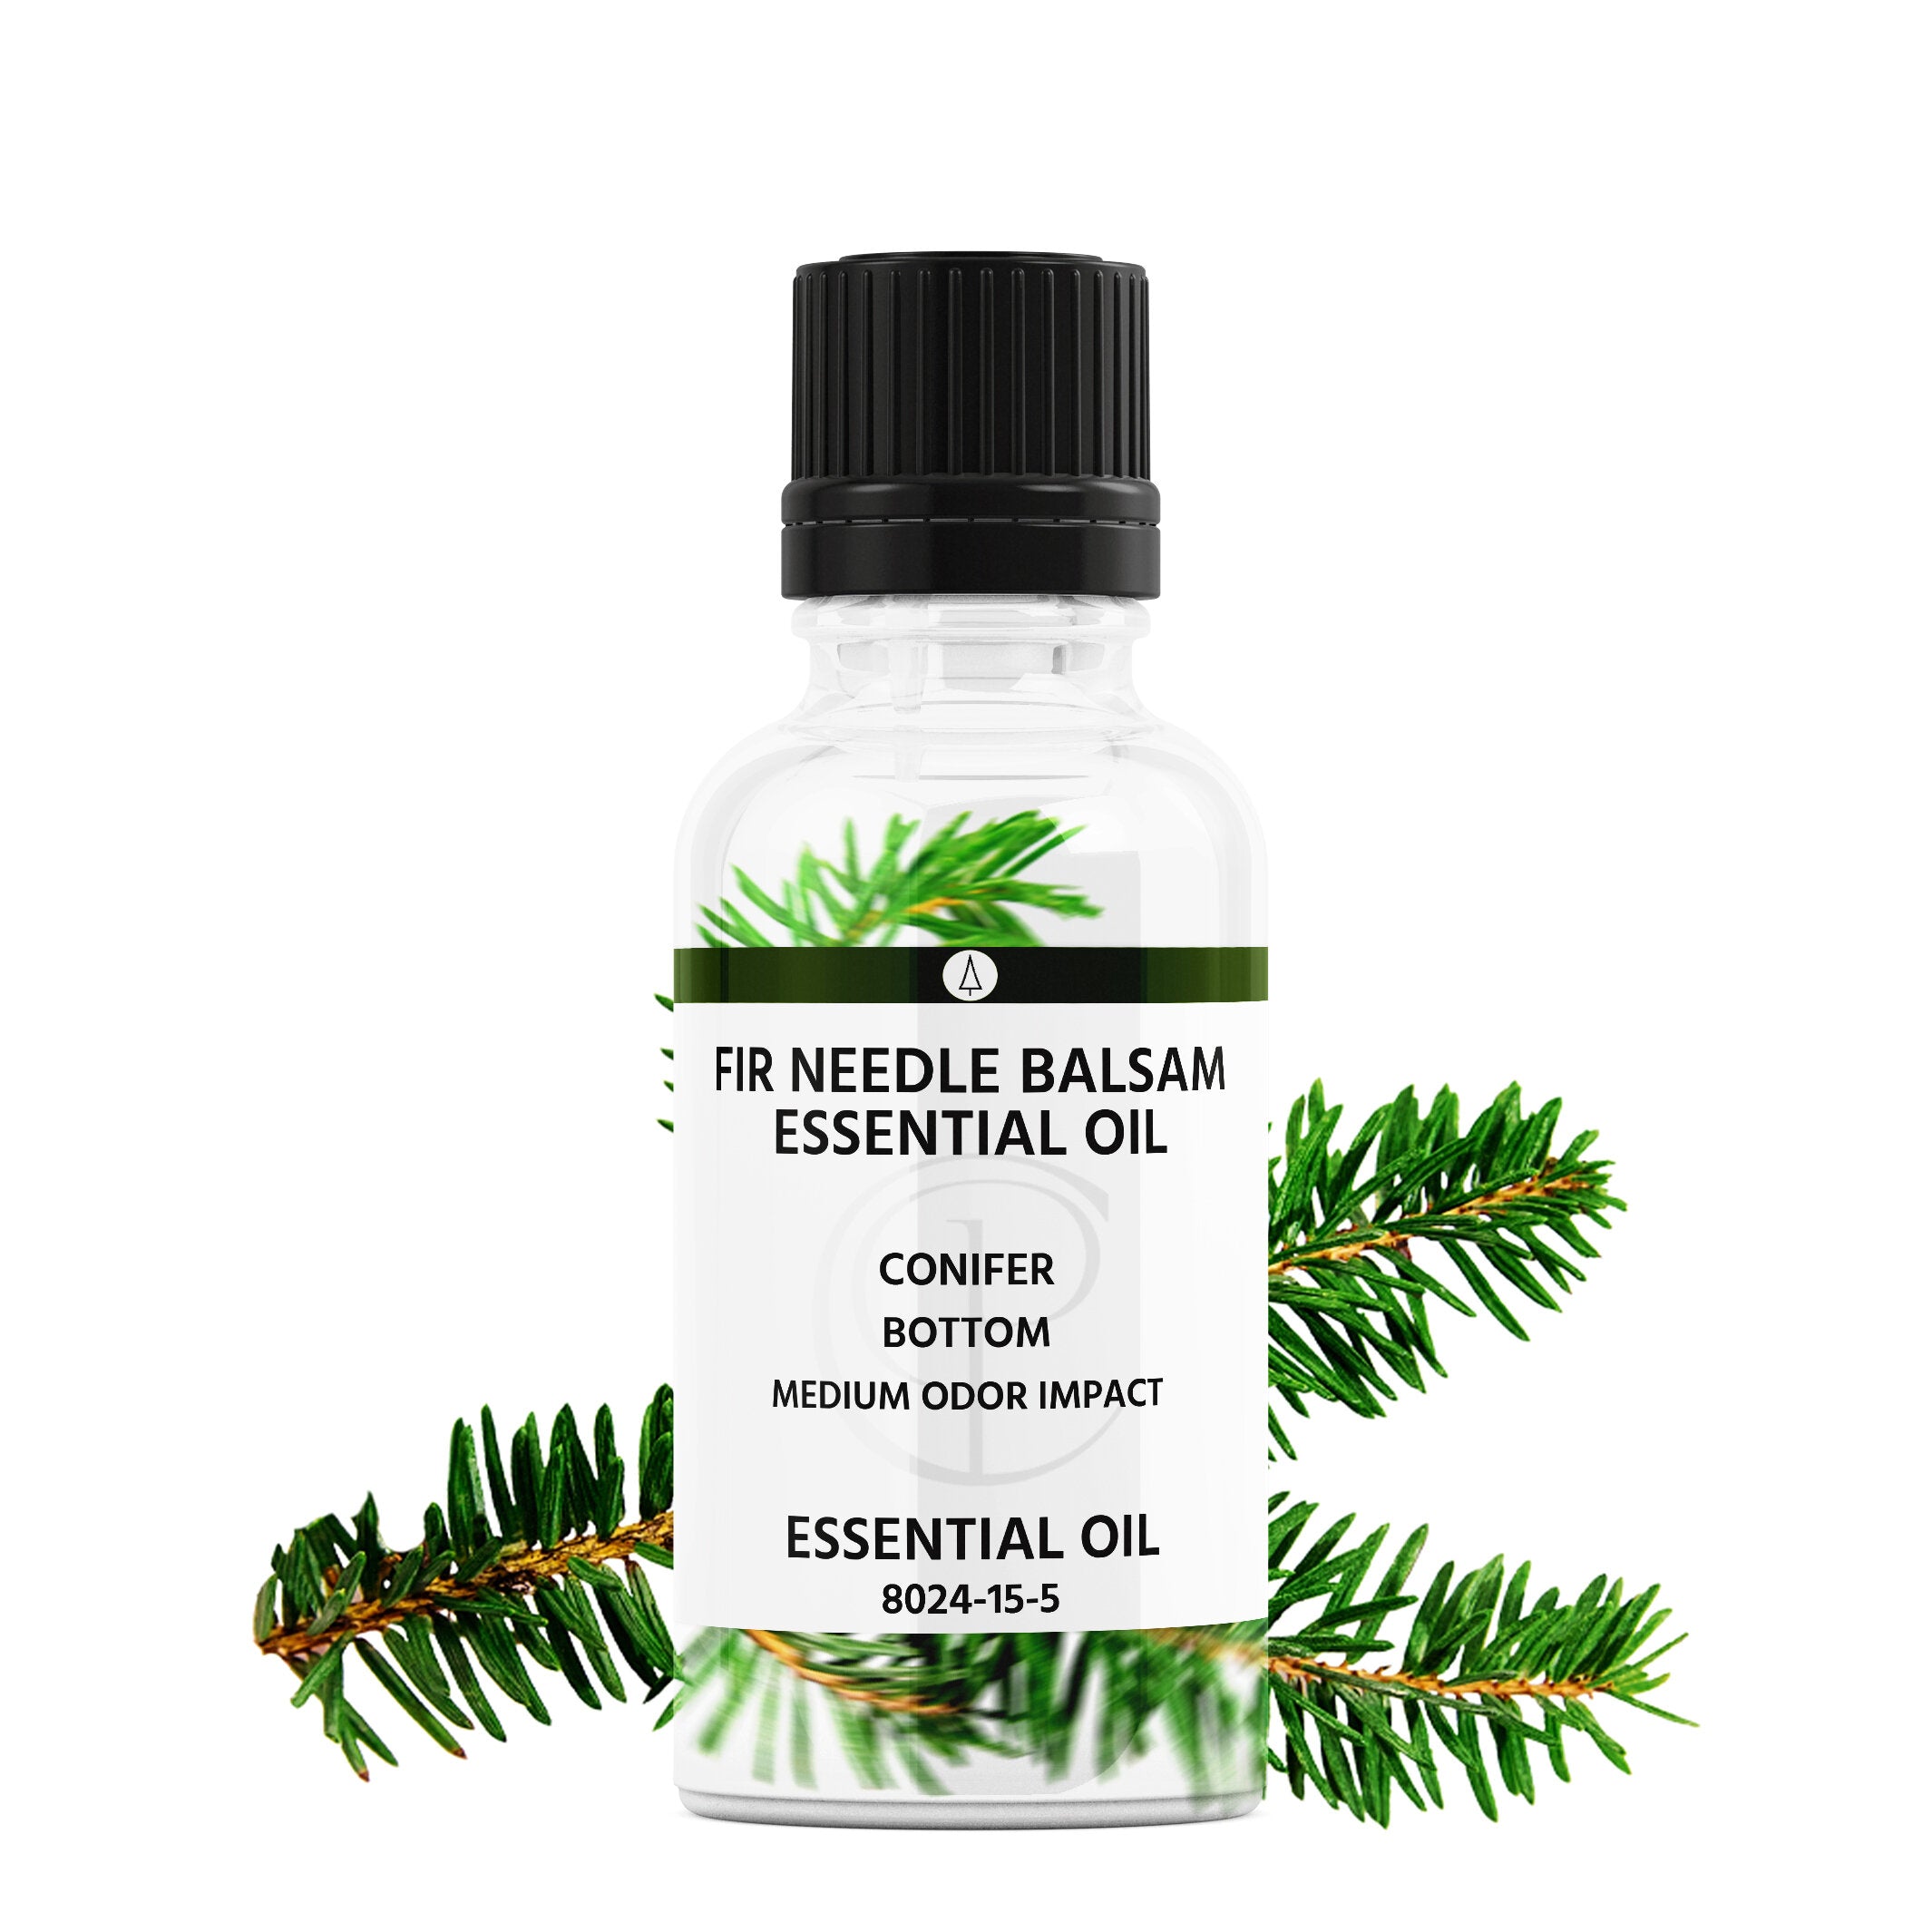 NOW Essential Oils, Balsam Fir Needle Oil, Woodsy Aromatherapy Scent